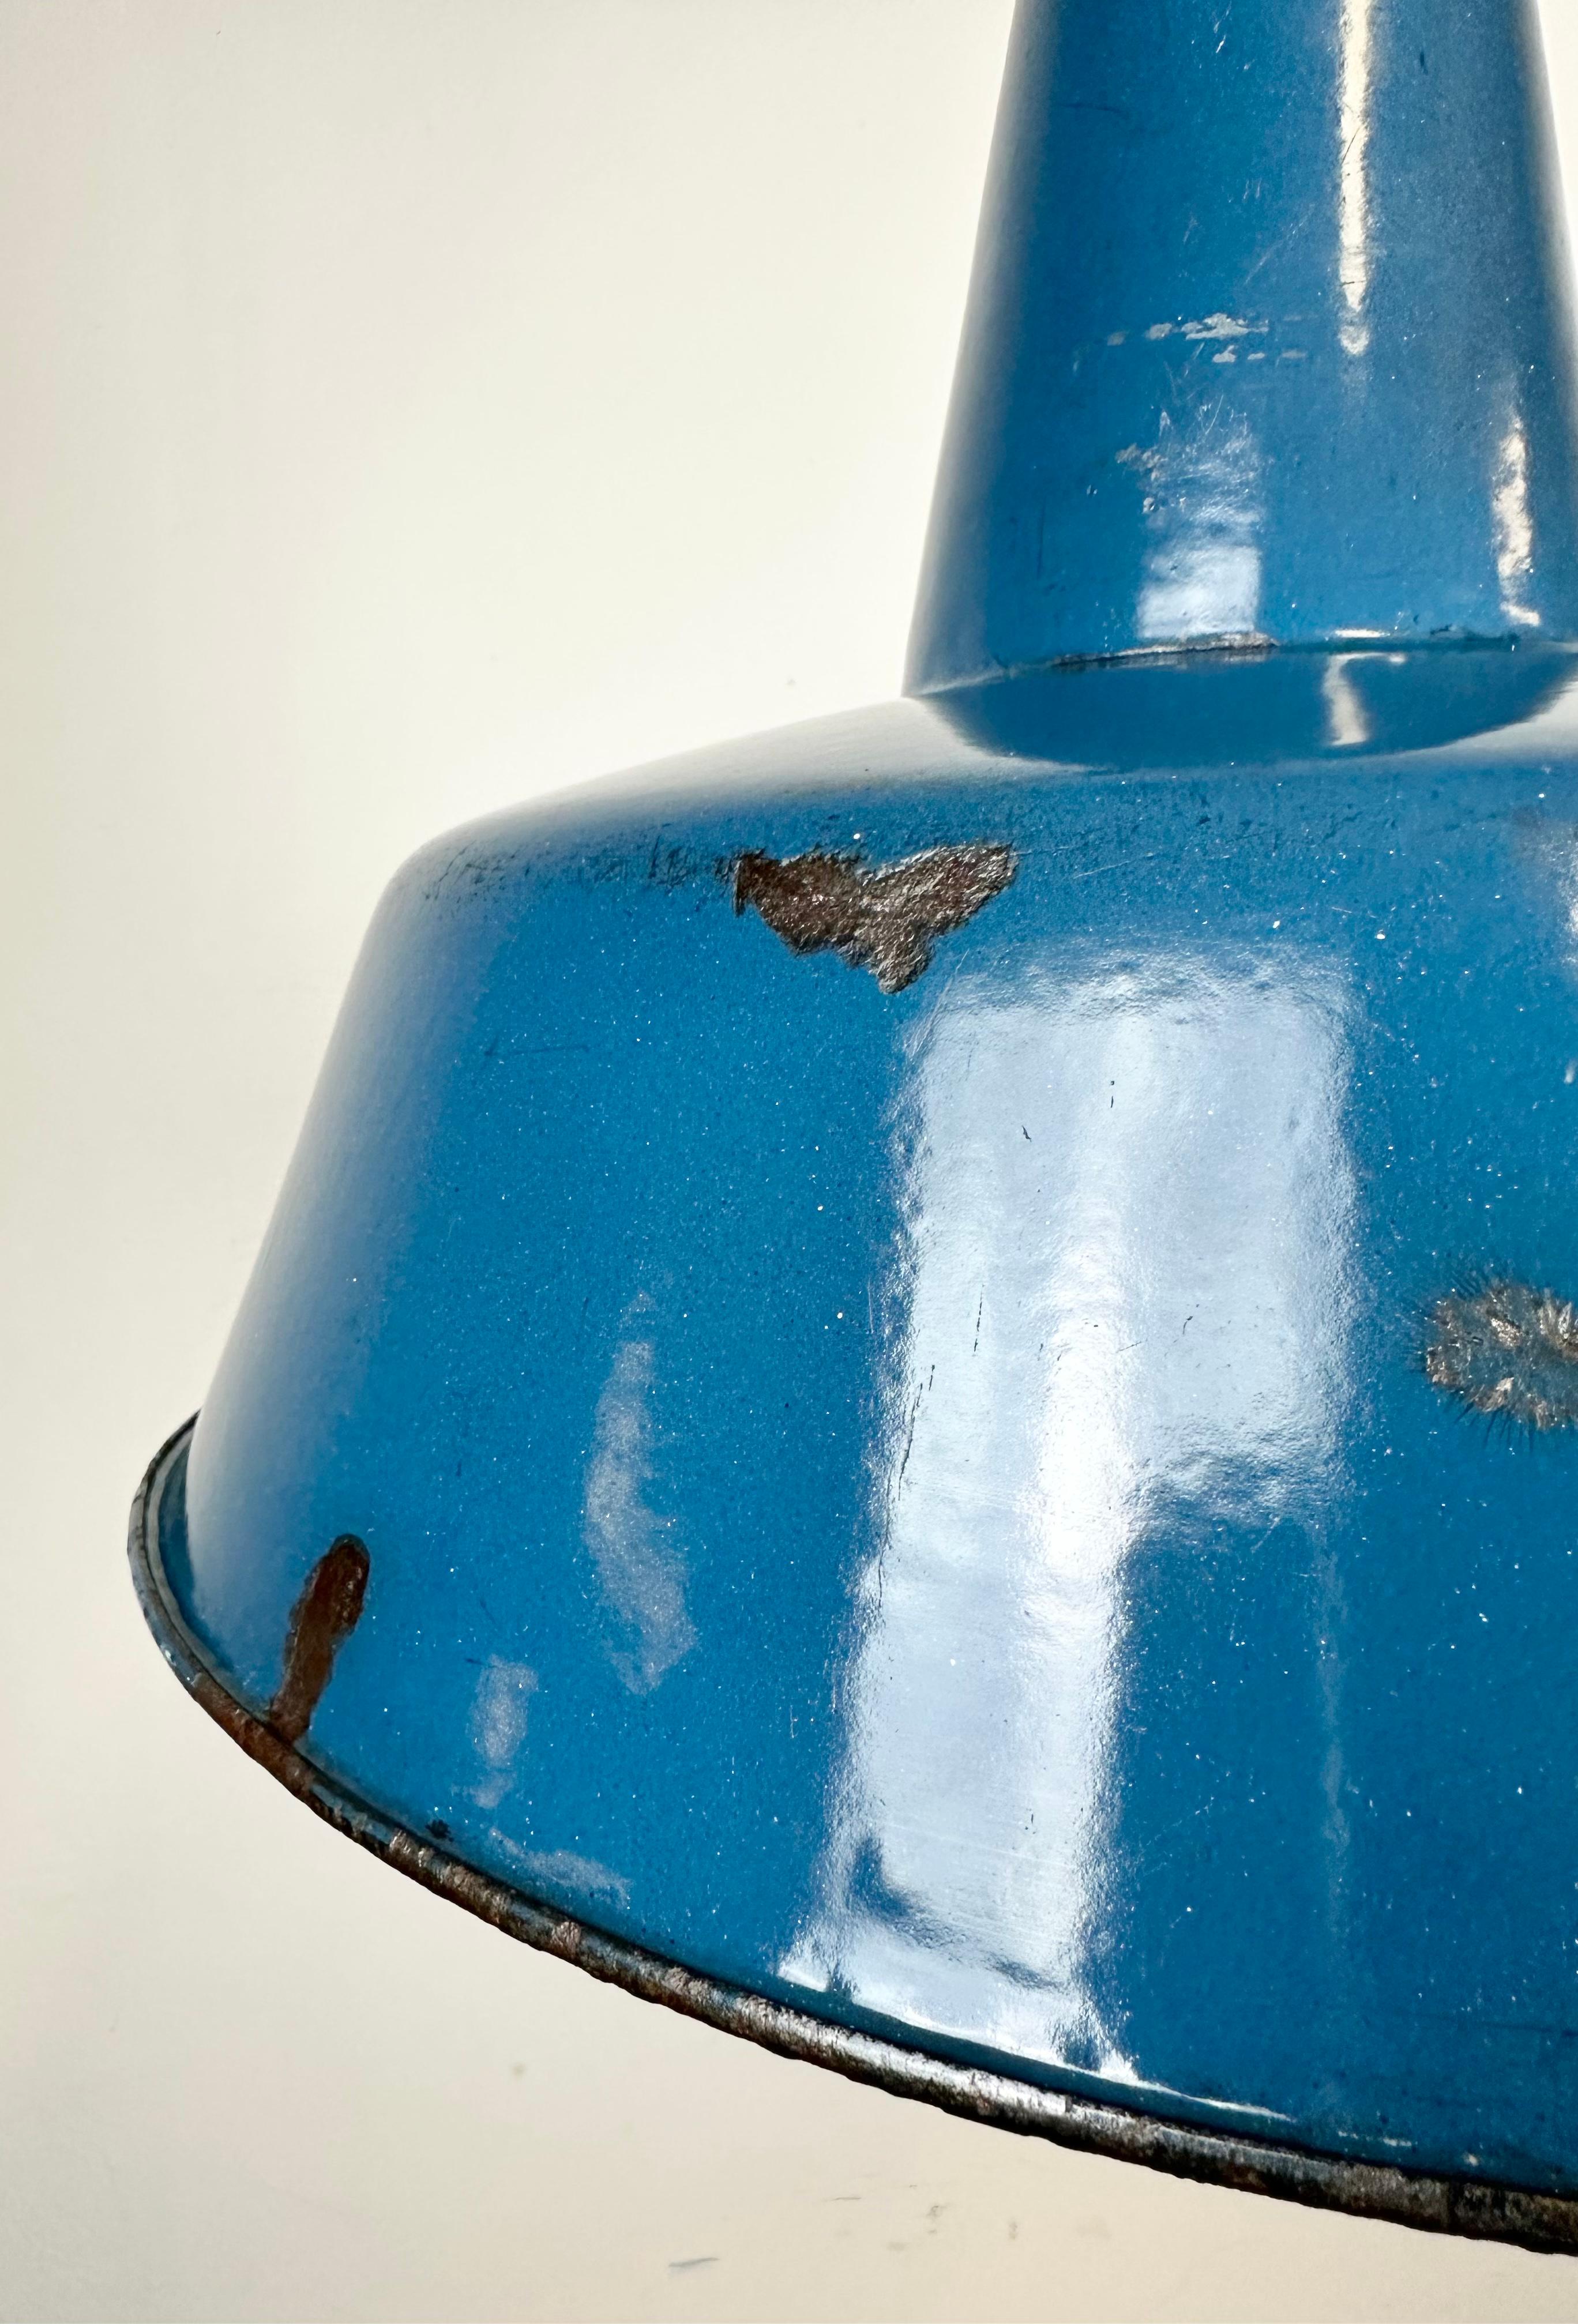 Industrial Blue Enamel Factory Lamp with Cast Iron Top, 1960s For Sale 3